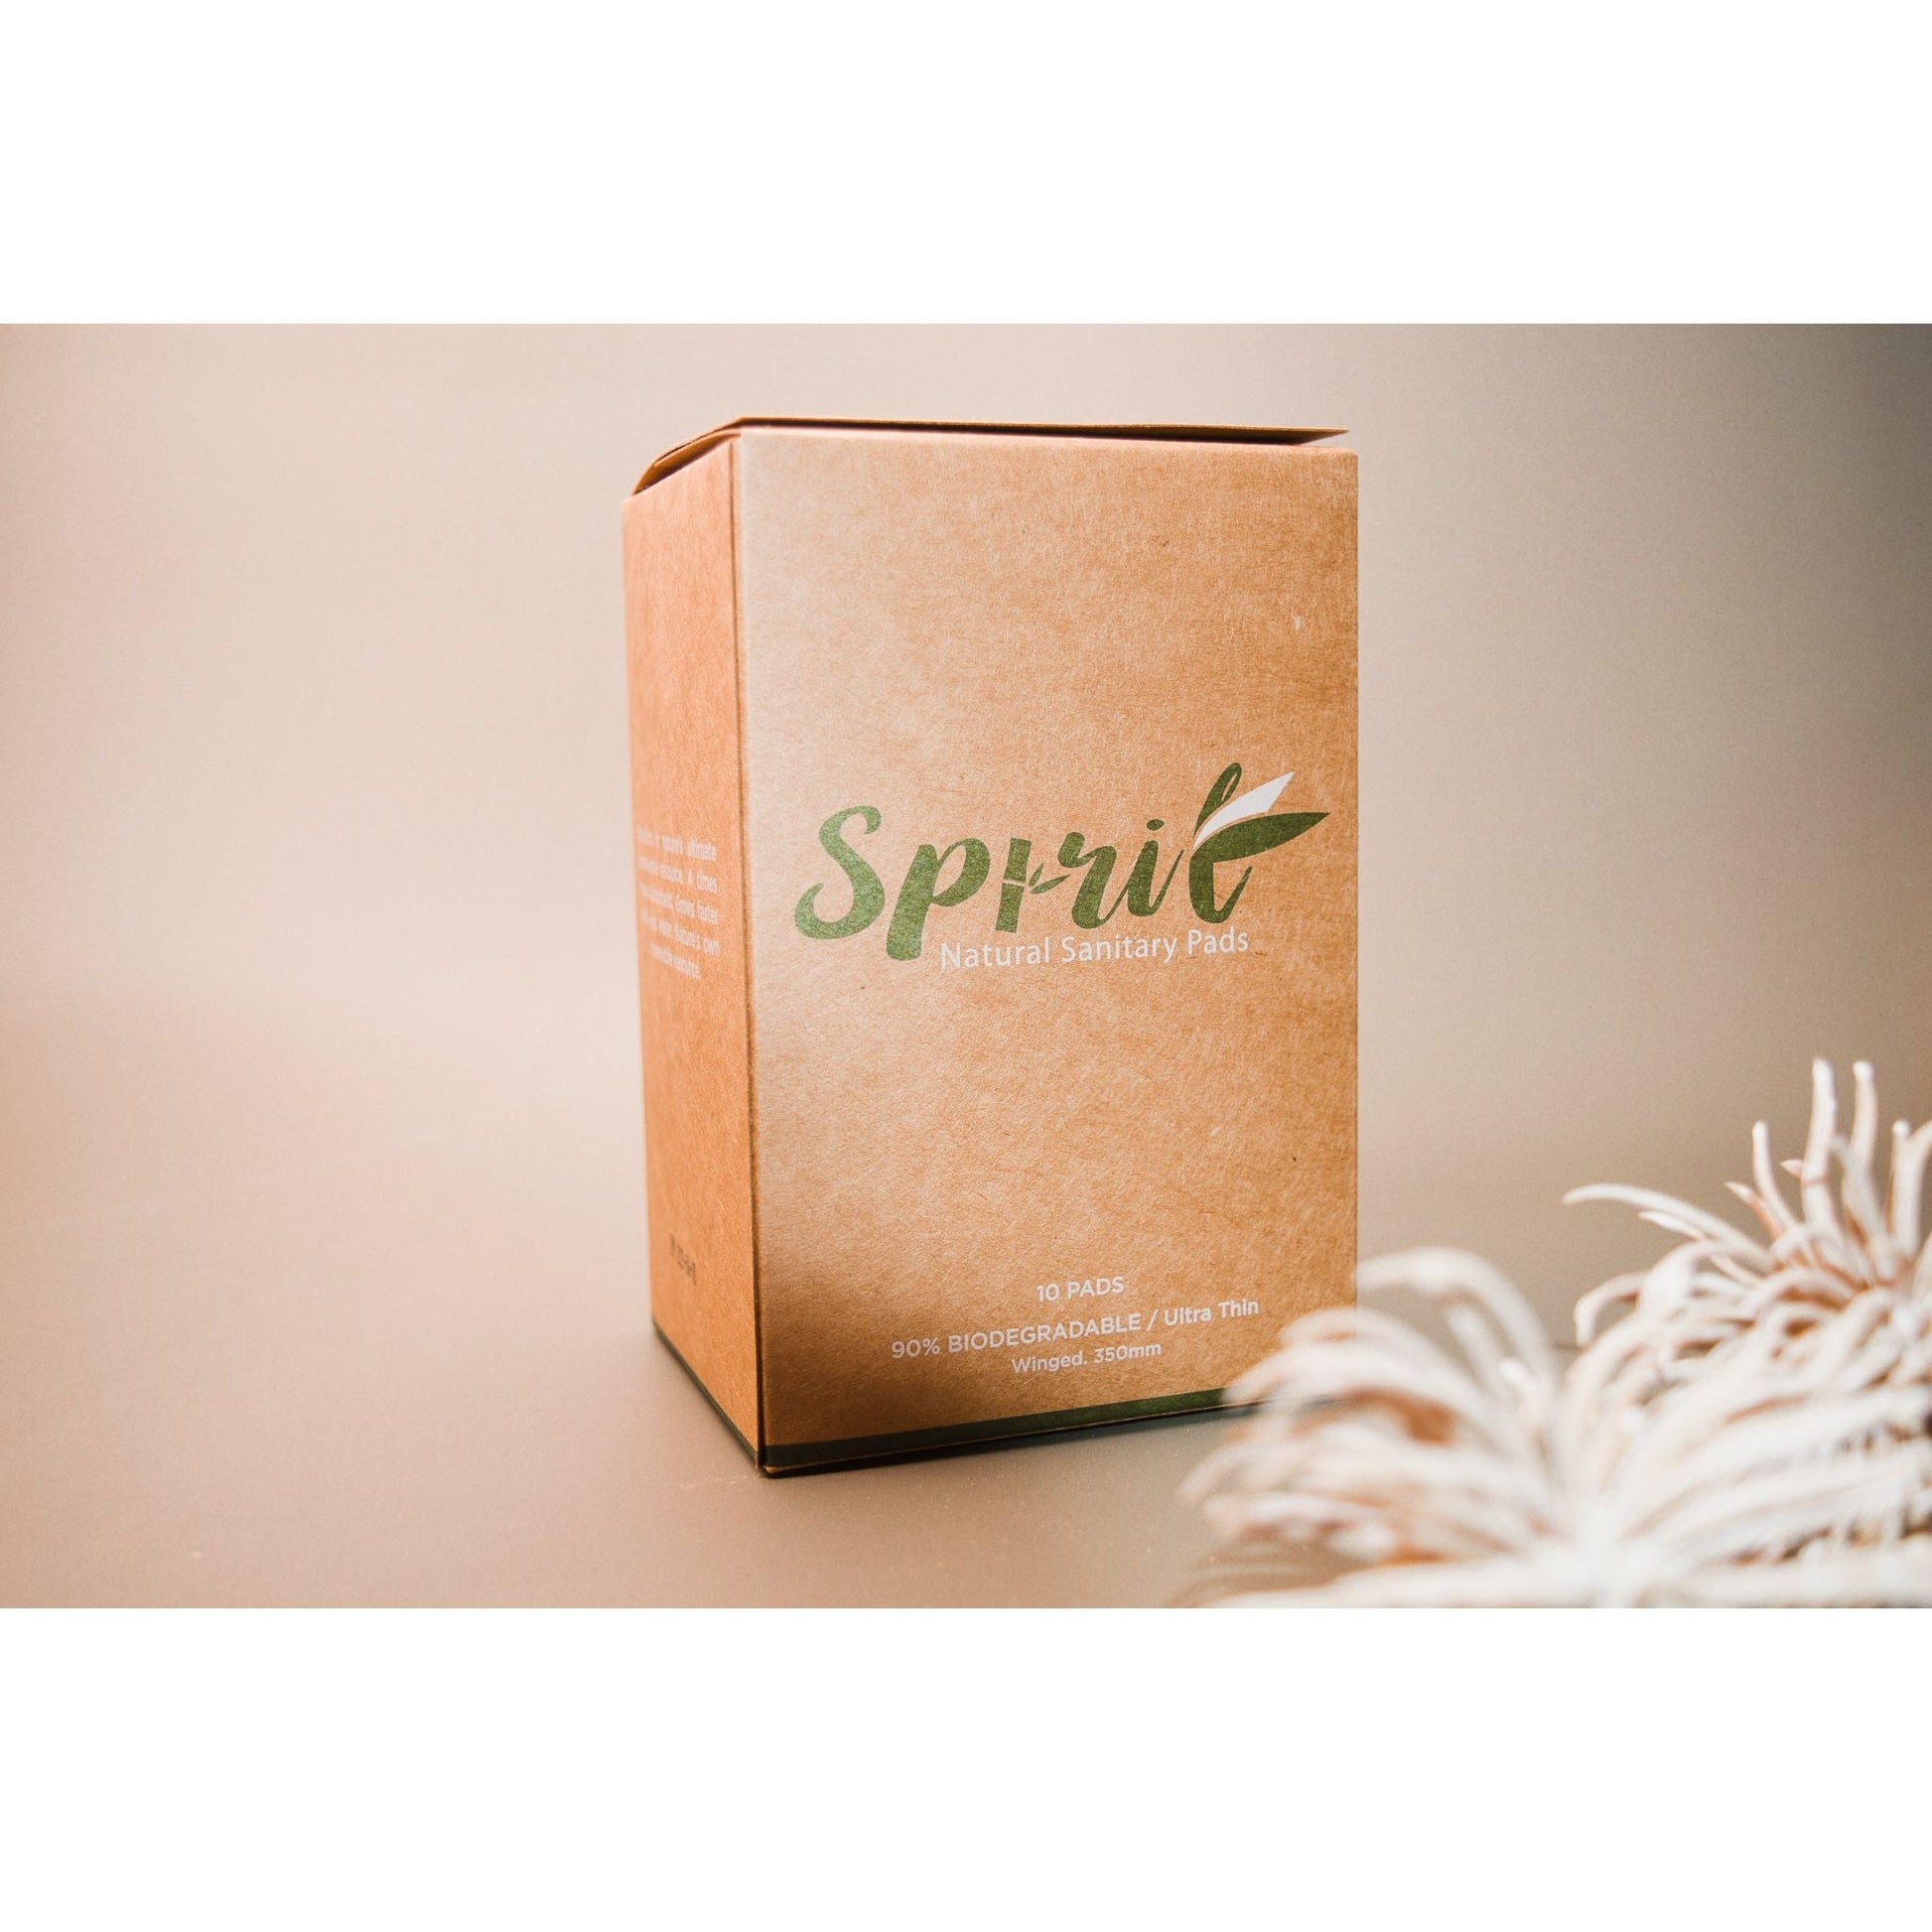 Spirit Sanitary Pads Pack of 10 Period Pads. Bamboo Period Pad. pads with wings. Brown and Green